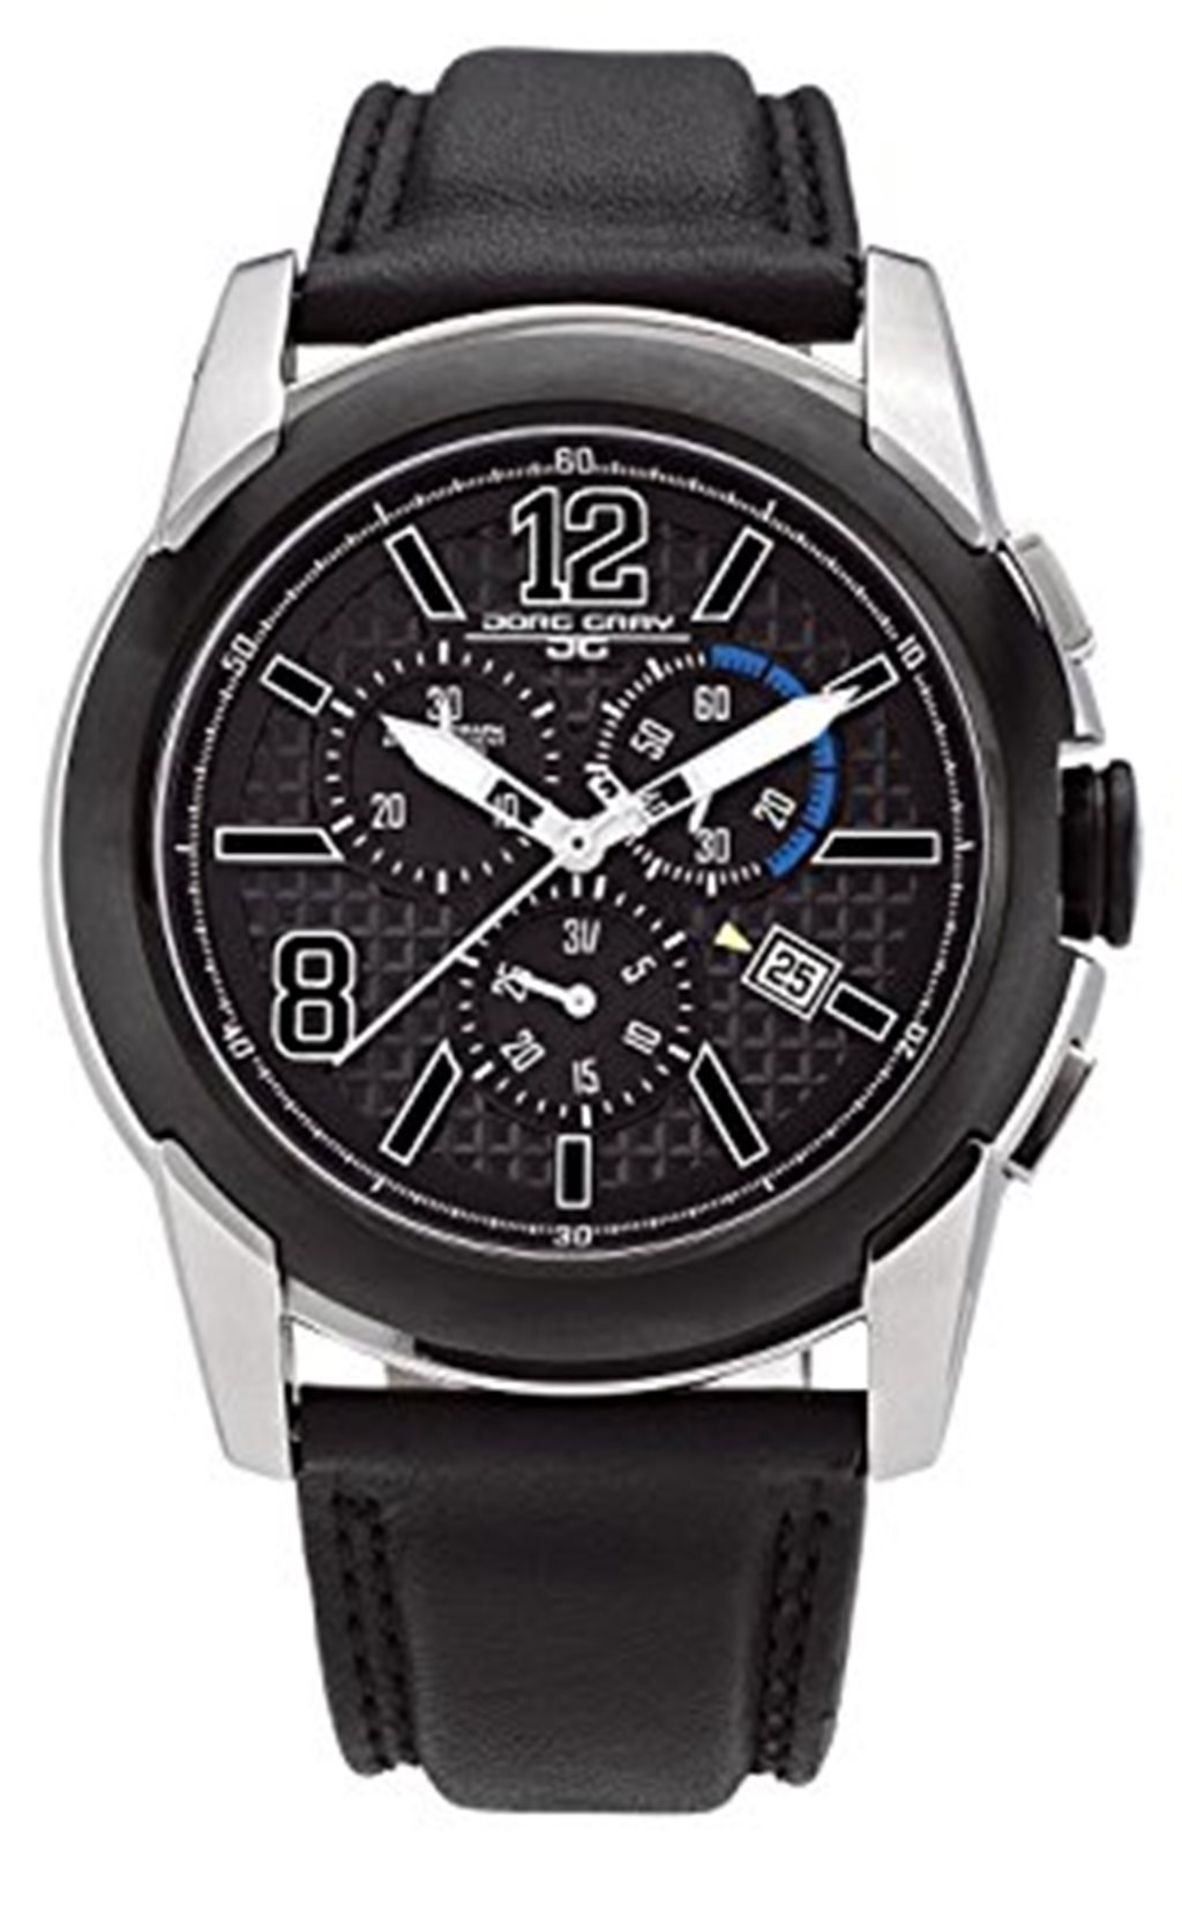 Jorg Gray Men's Quartz Analogue Watch JG9400-12 With Calf Leather Strap and Black Dial